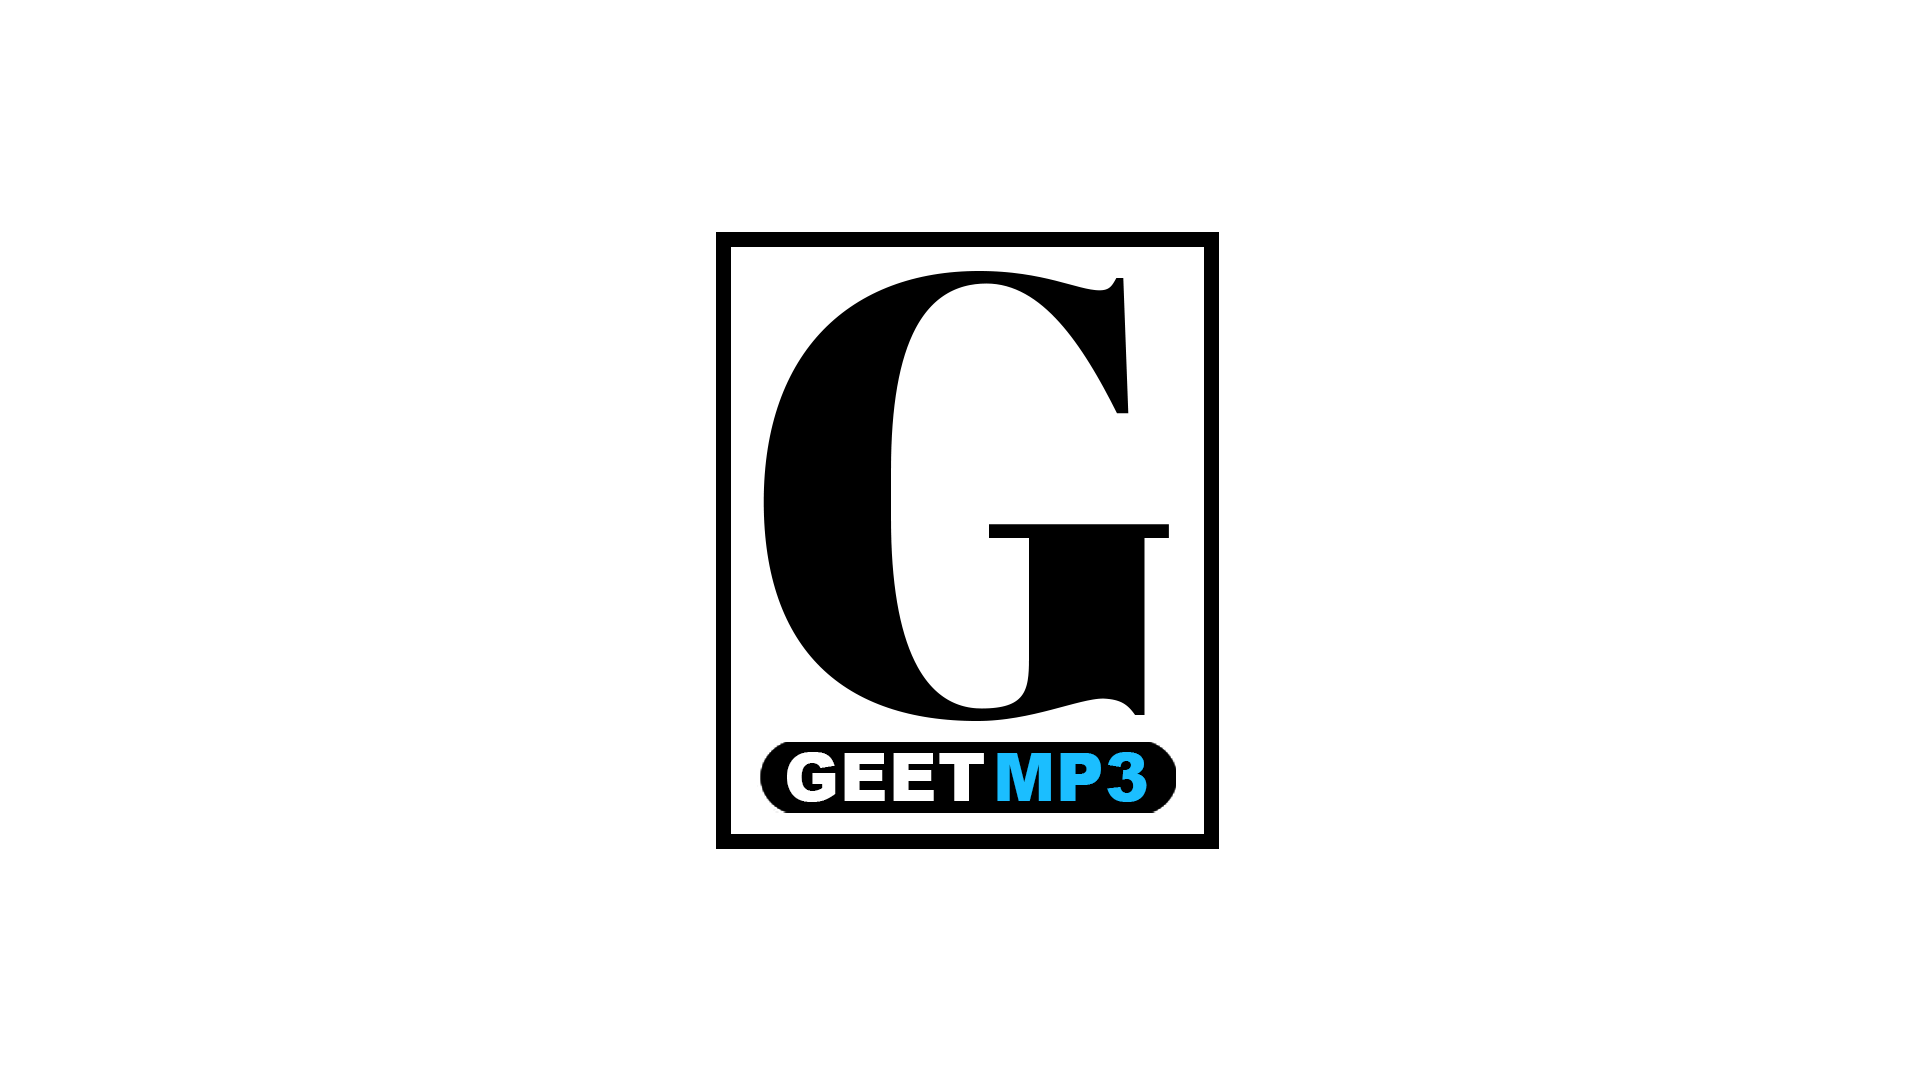 file:geet mp3 (black).png - wikimedia commons